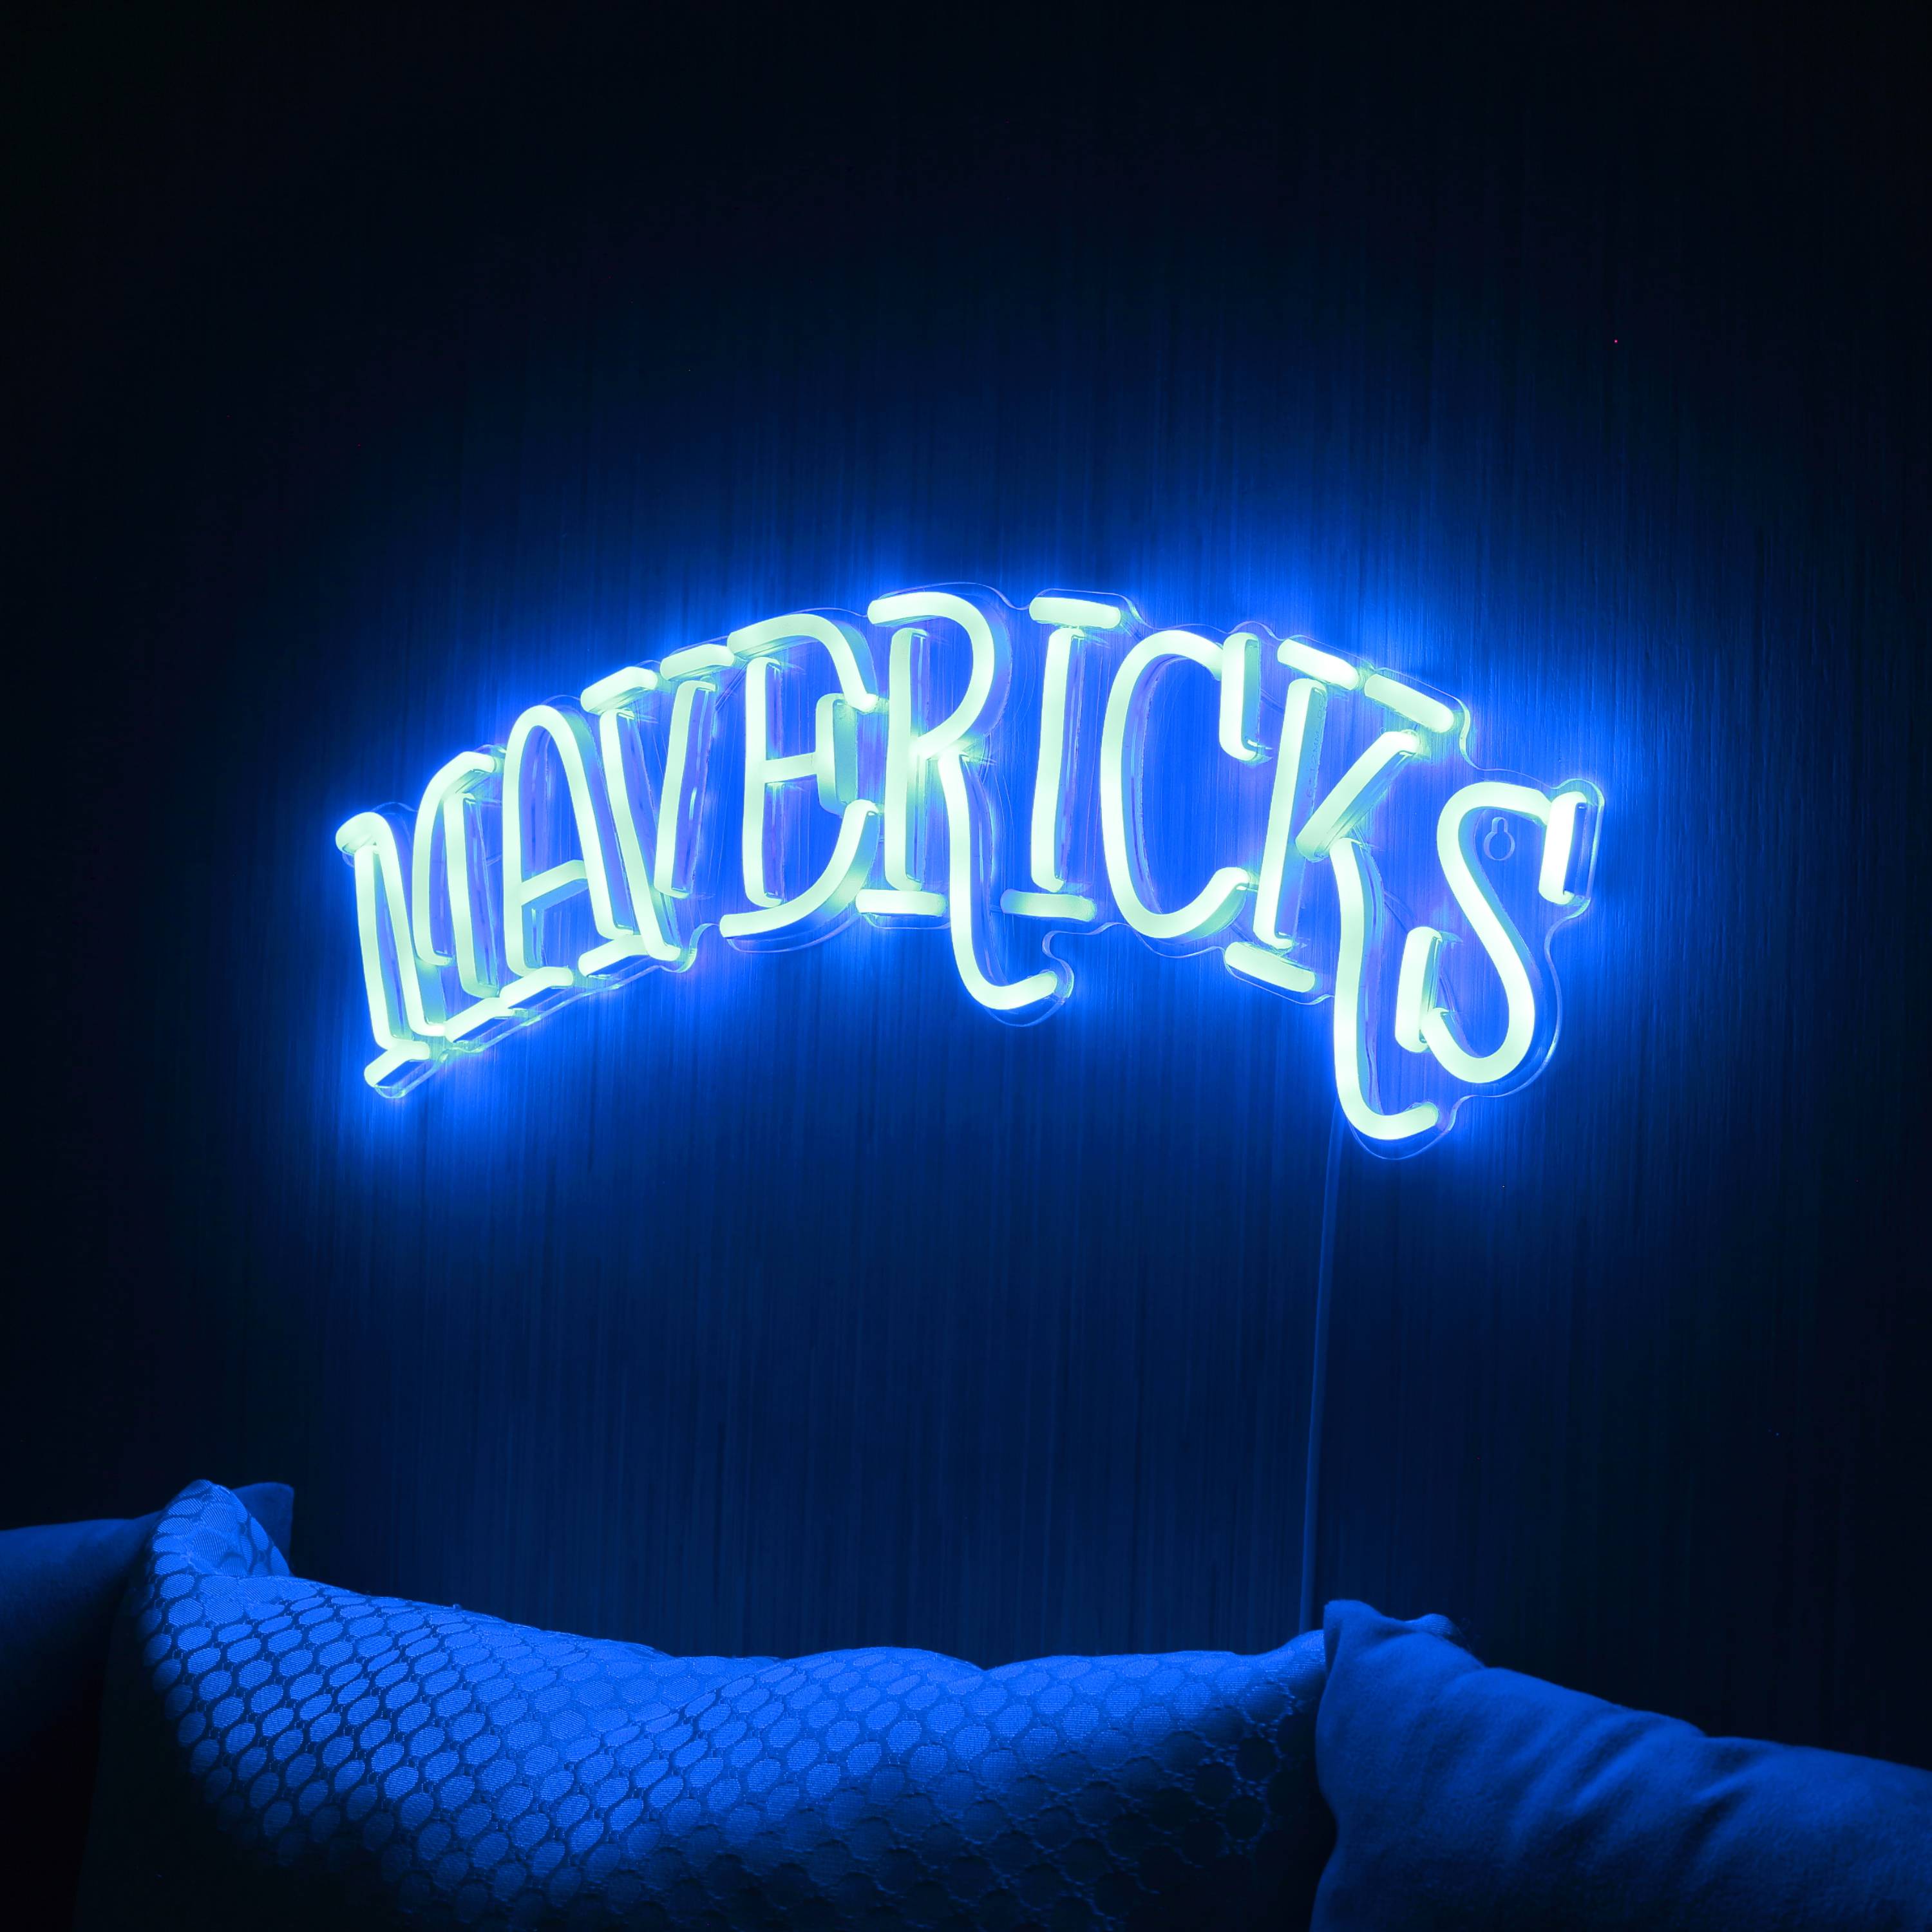 Dallas Mavericks on X: Only in Dallas will you feel the energy the  downtown skyline brings to its Dallasites. Marked by the neon glow on the  letters, numbers and piping, the new